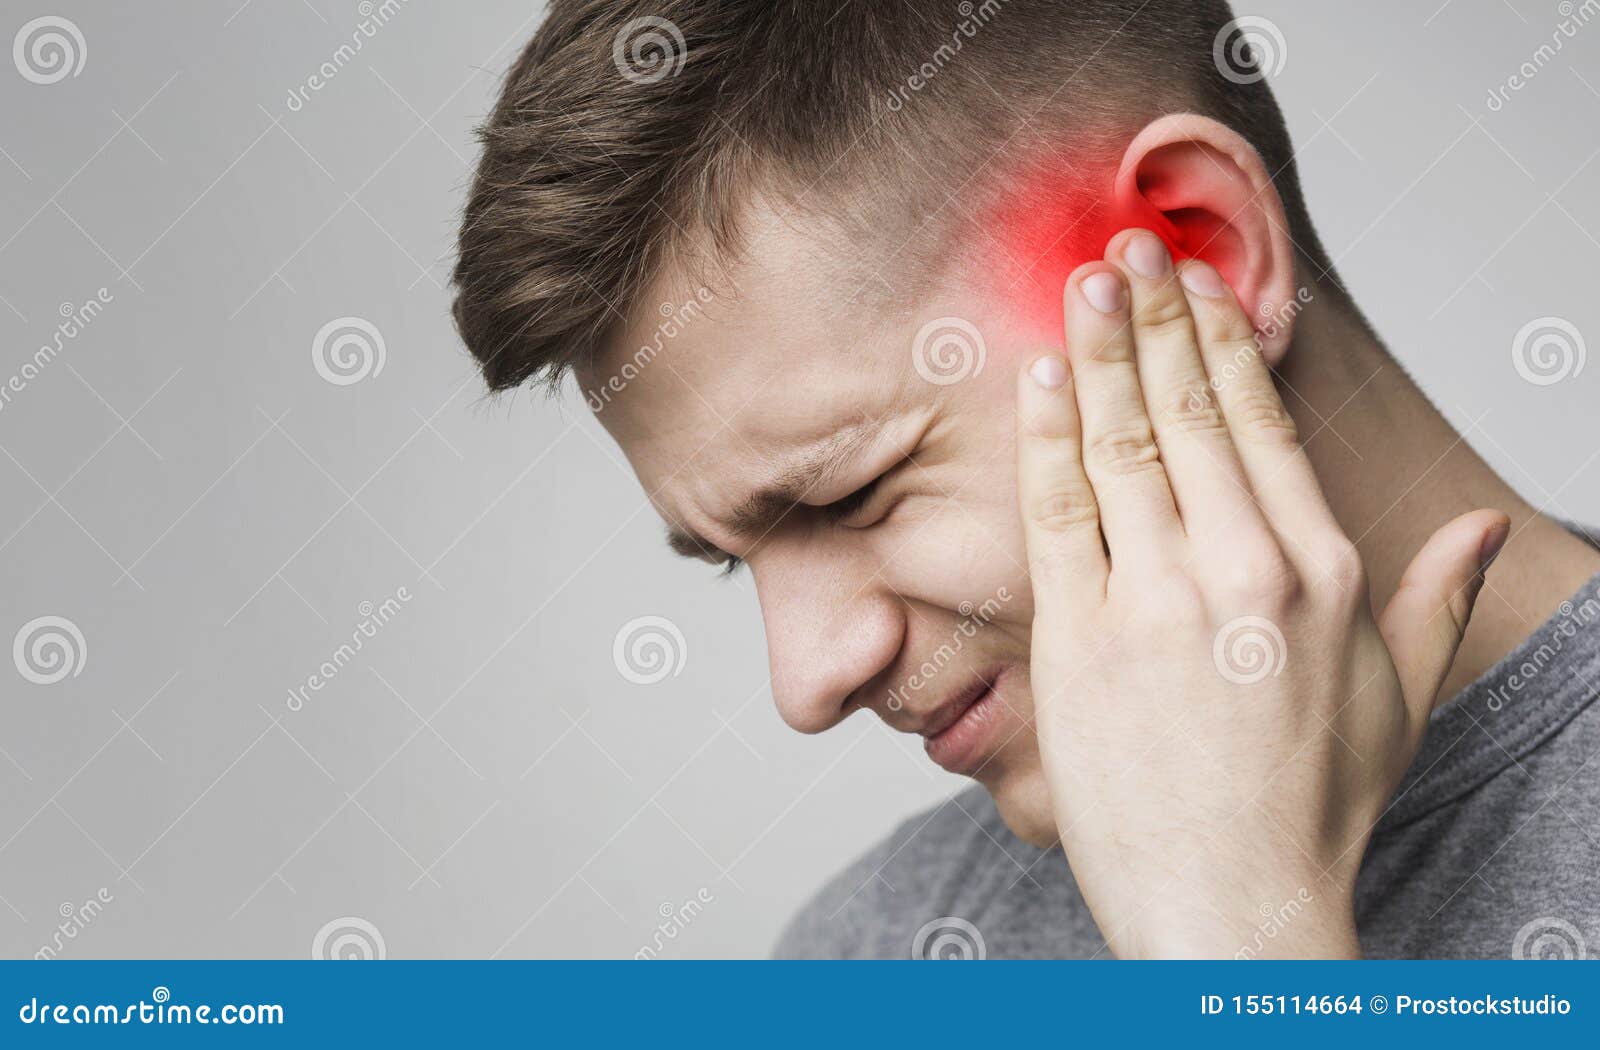 young man has sore ear, suffering from otitis